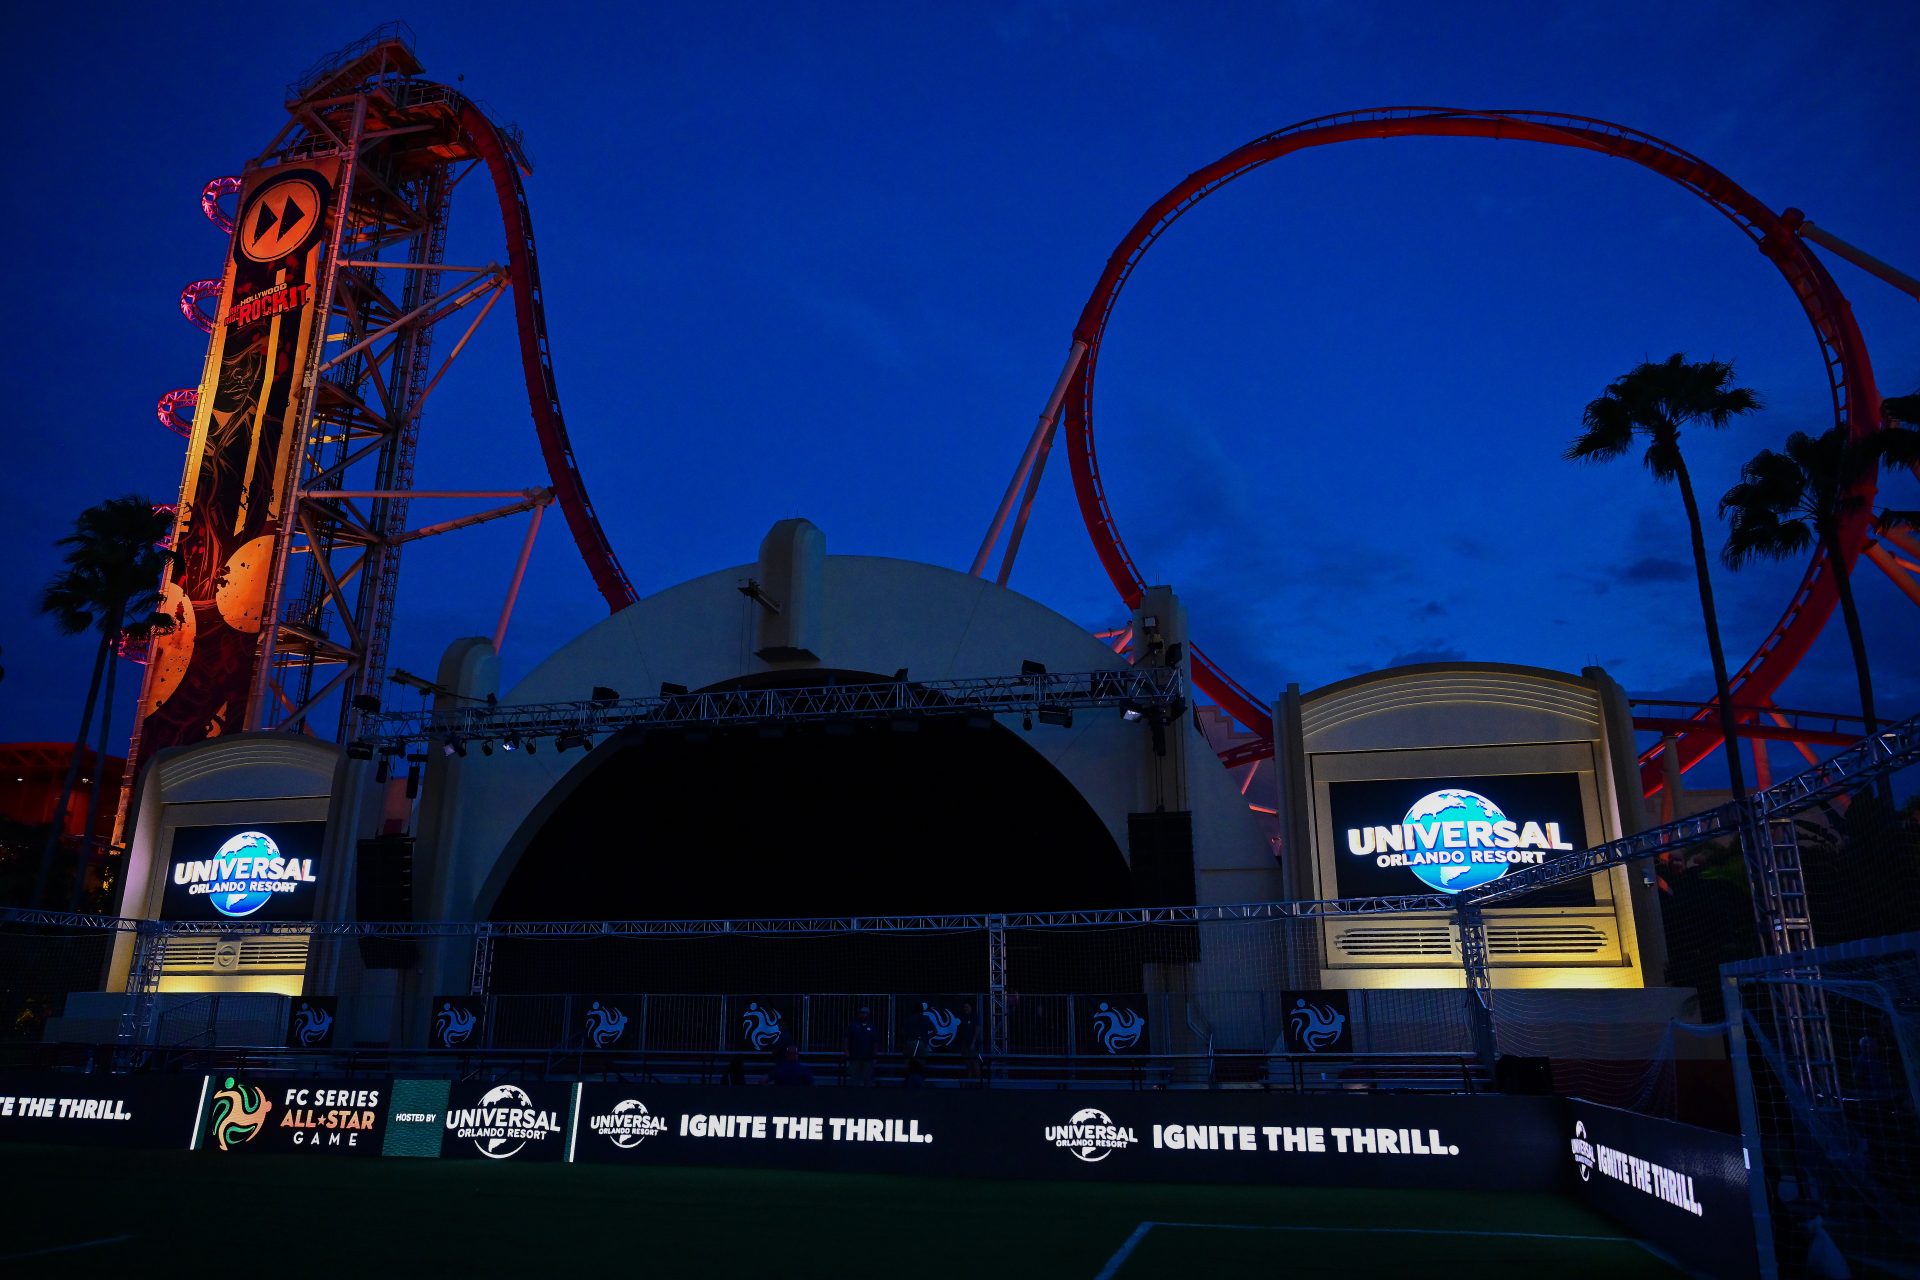 Florida Woman Sues Universal Orlando After Alleging Roller Coaster Ride Left Her With “Traumatic Brain Injury” thumbnail